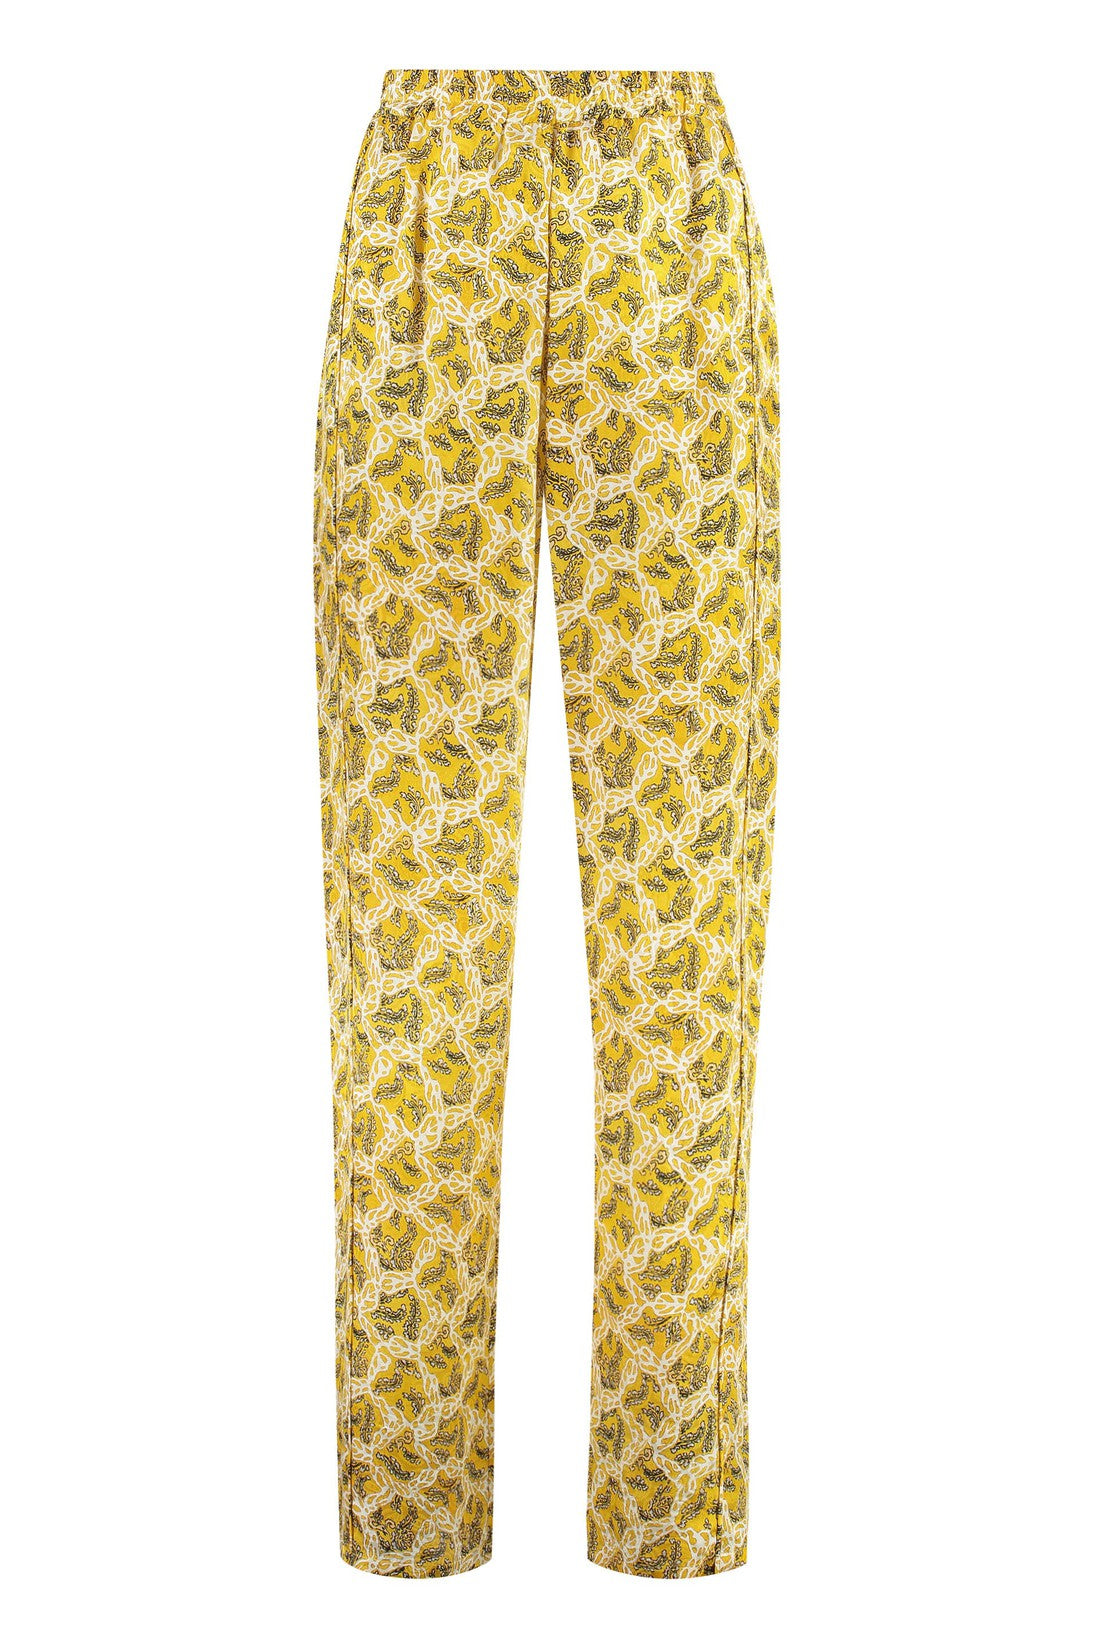 Isabel Marant-OUTLET-SALE-Piera Printed high-rise trousers-ARCHIVIST